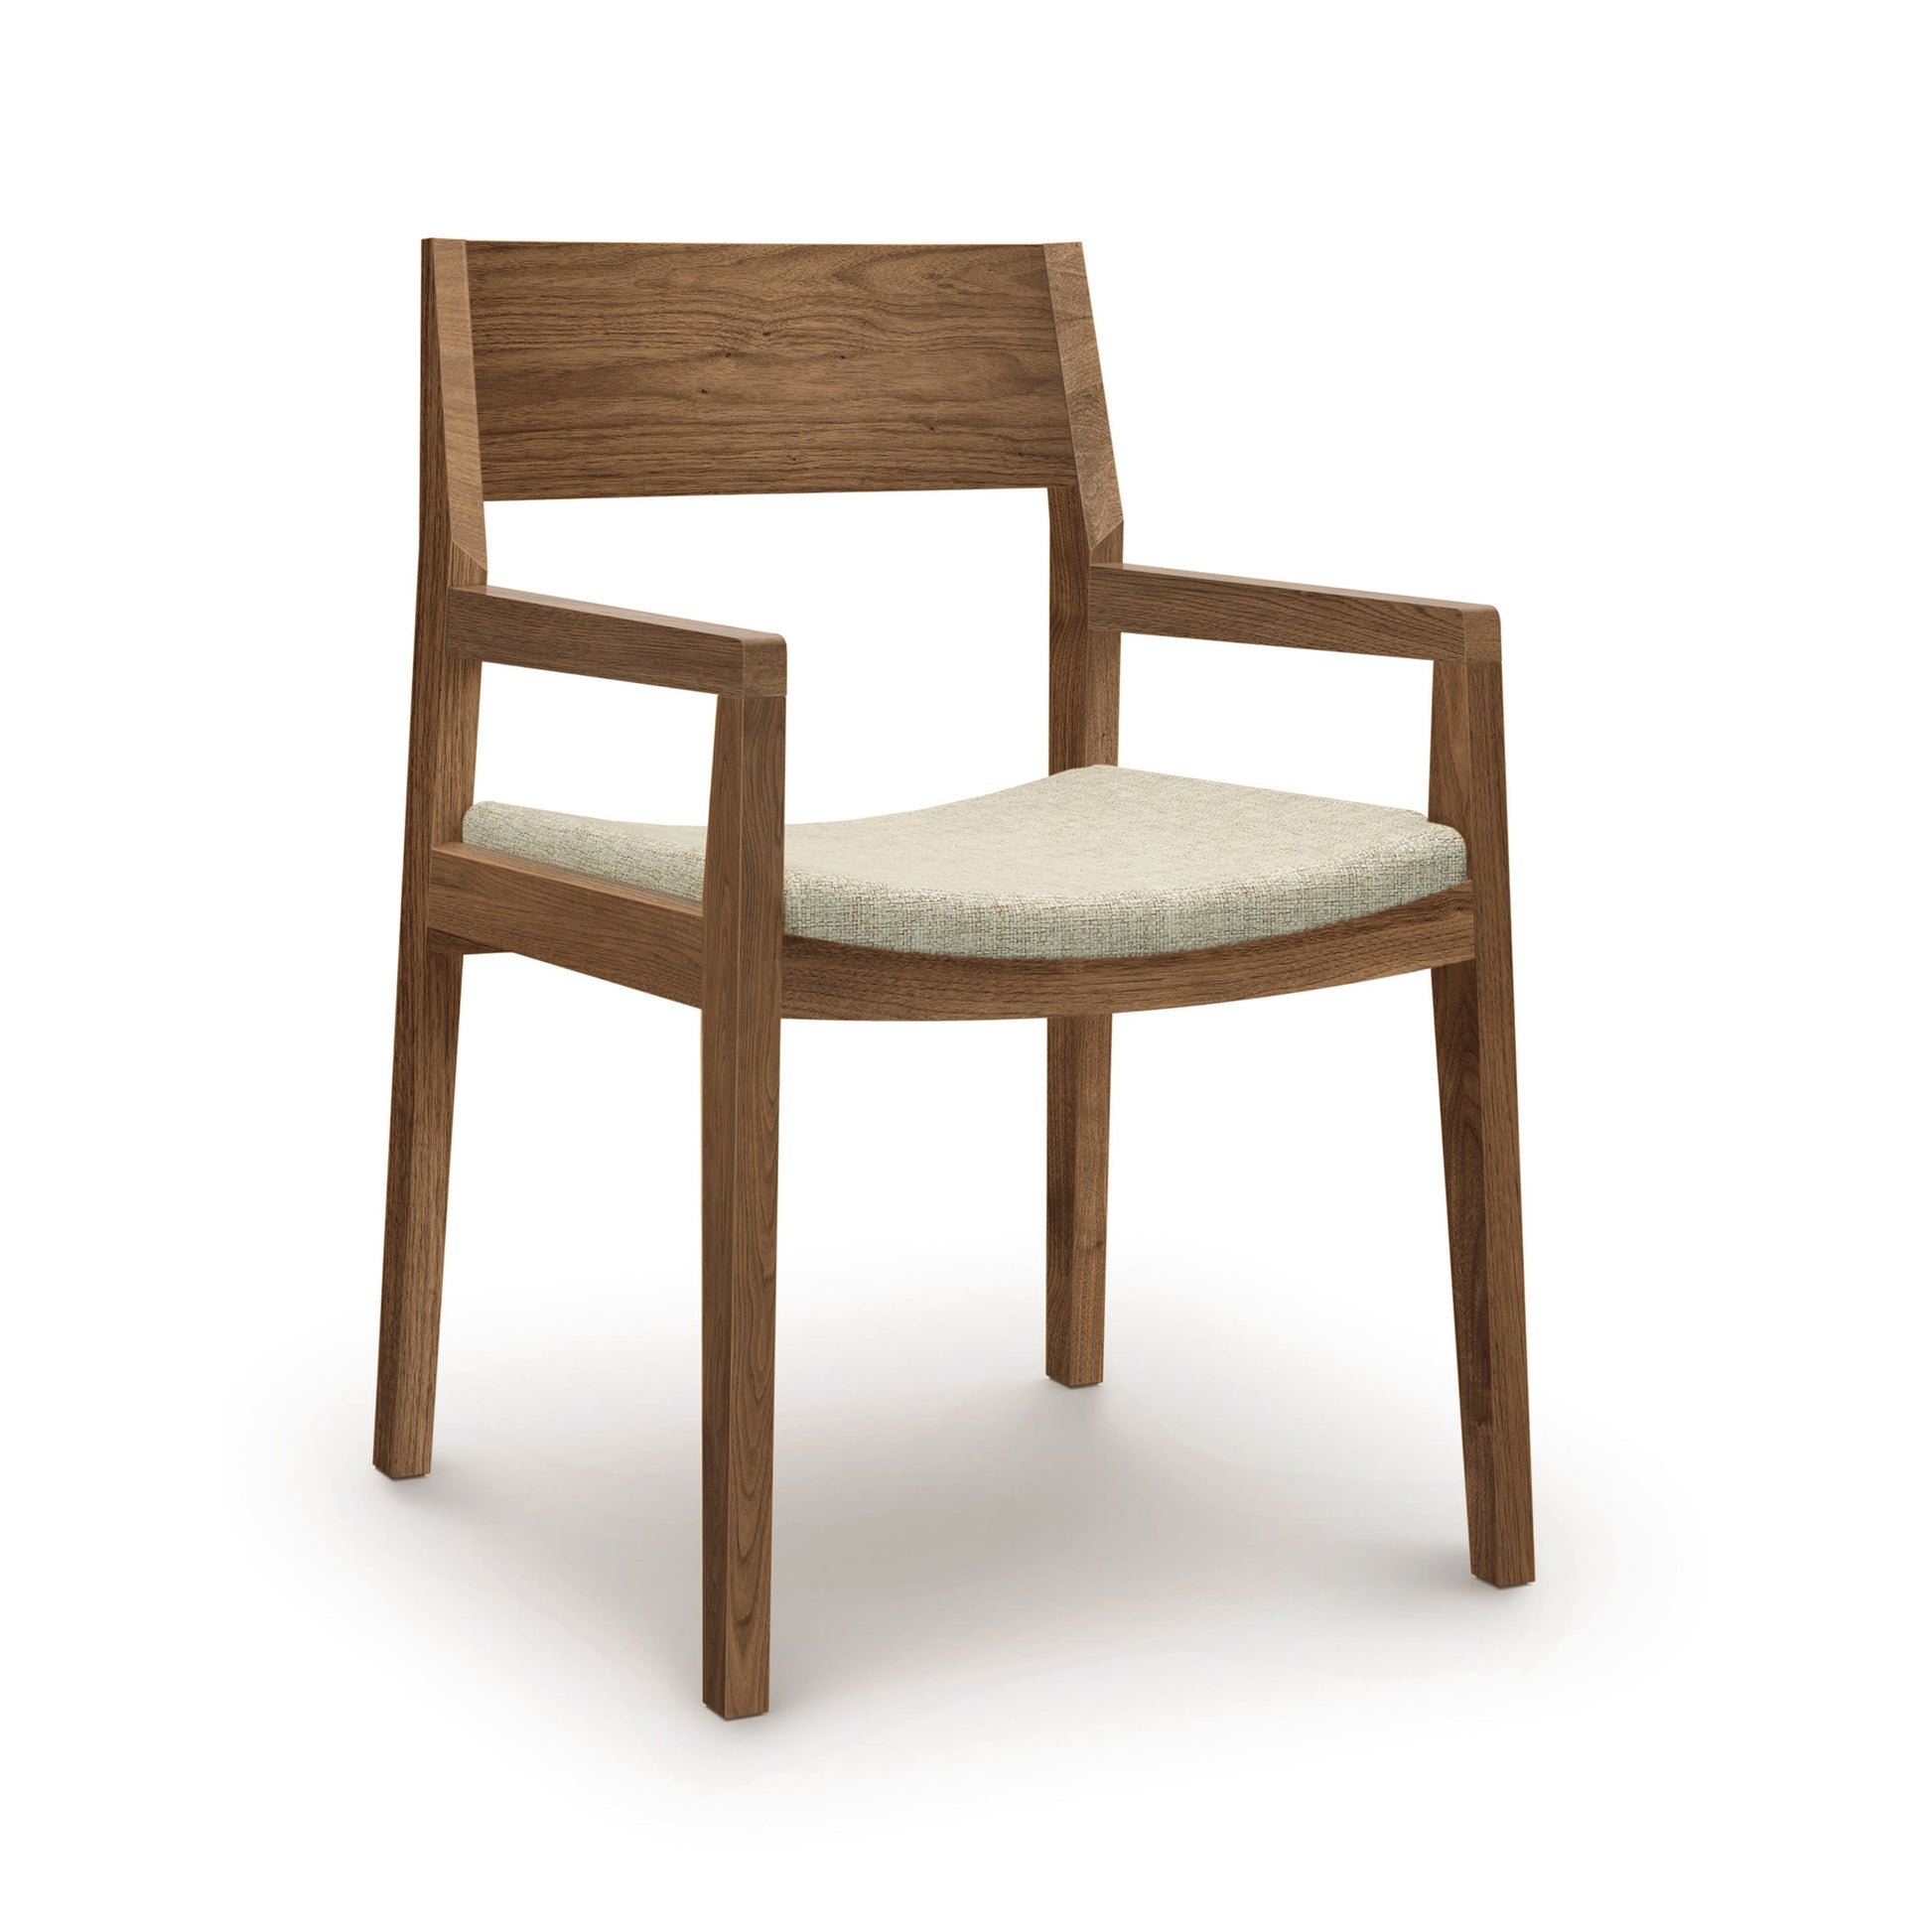 A wooden dining chair with a beige upholstered seat.